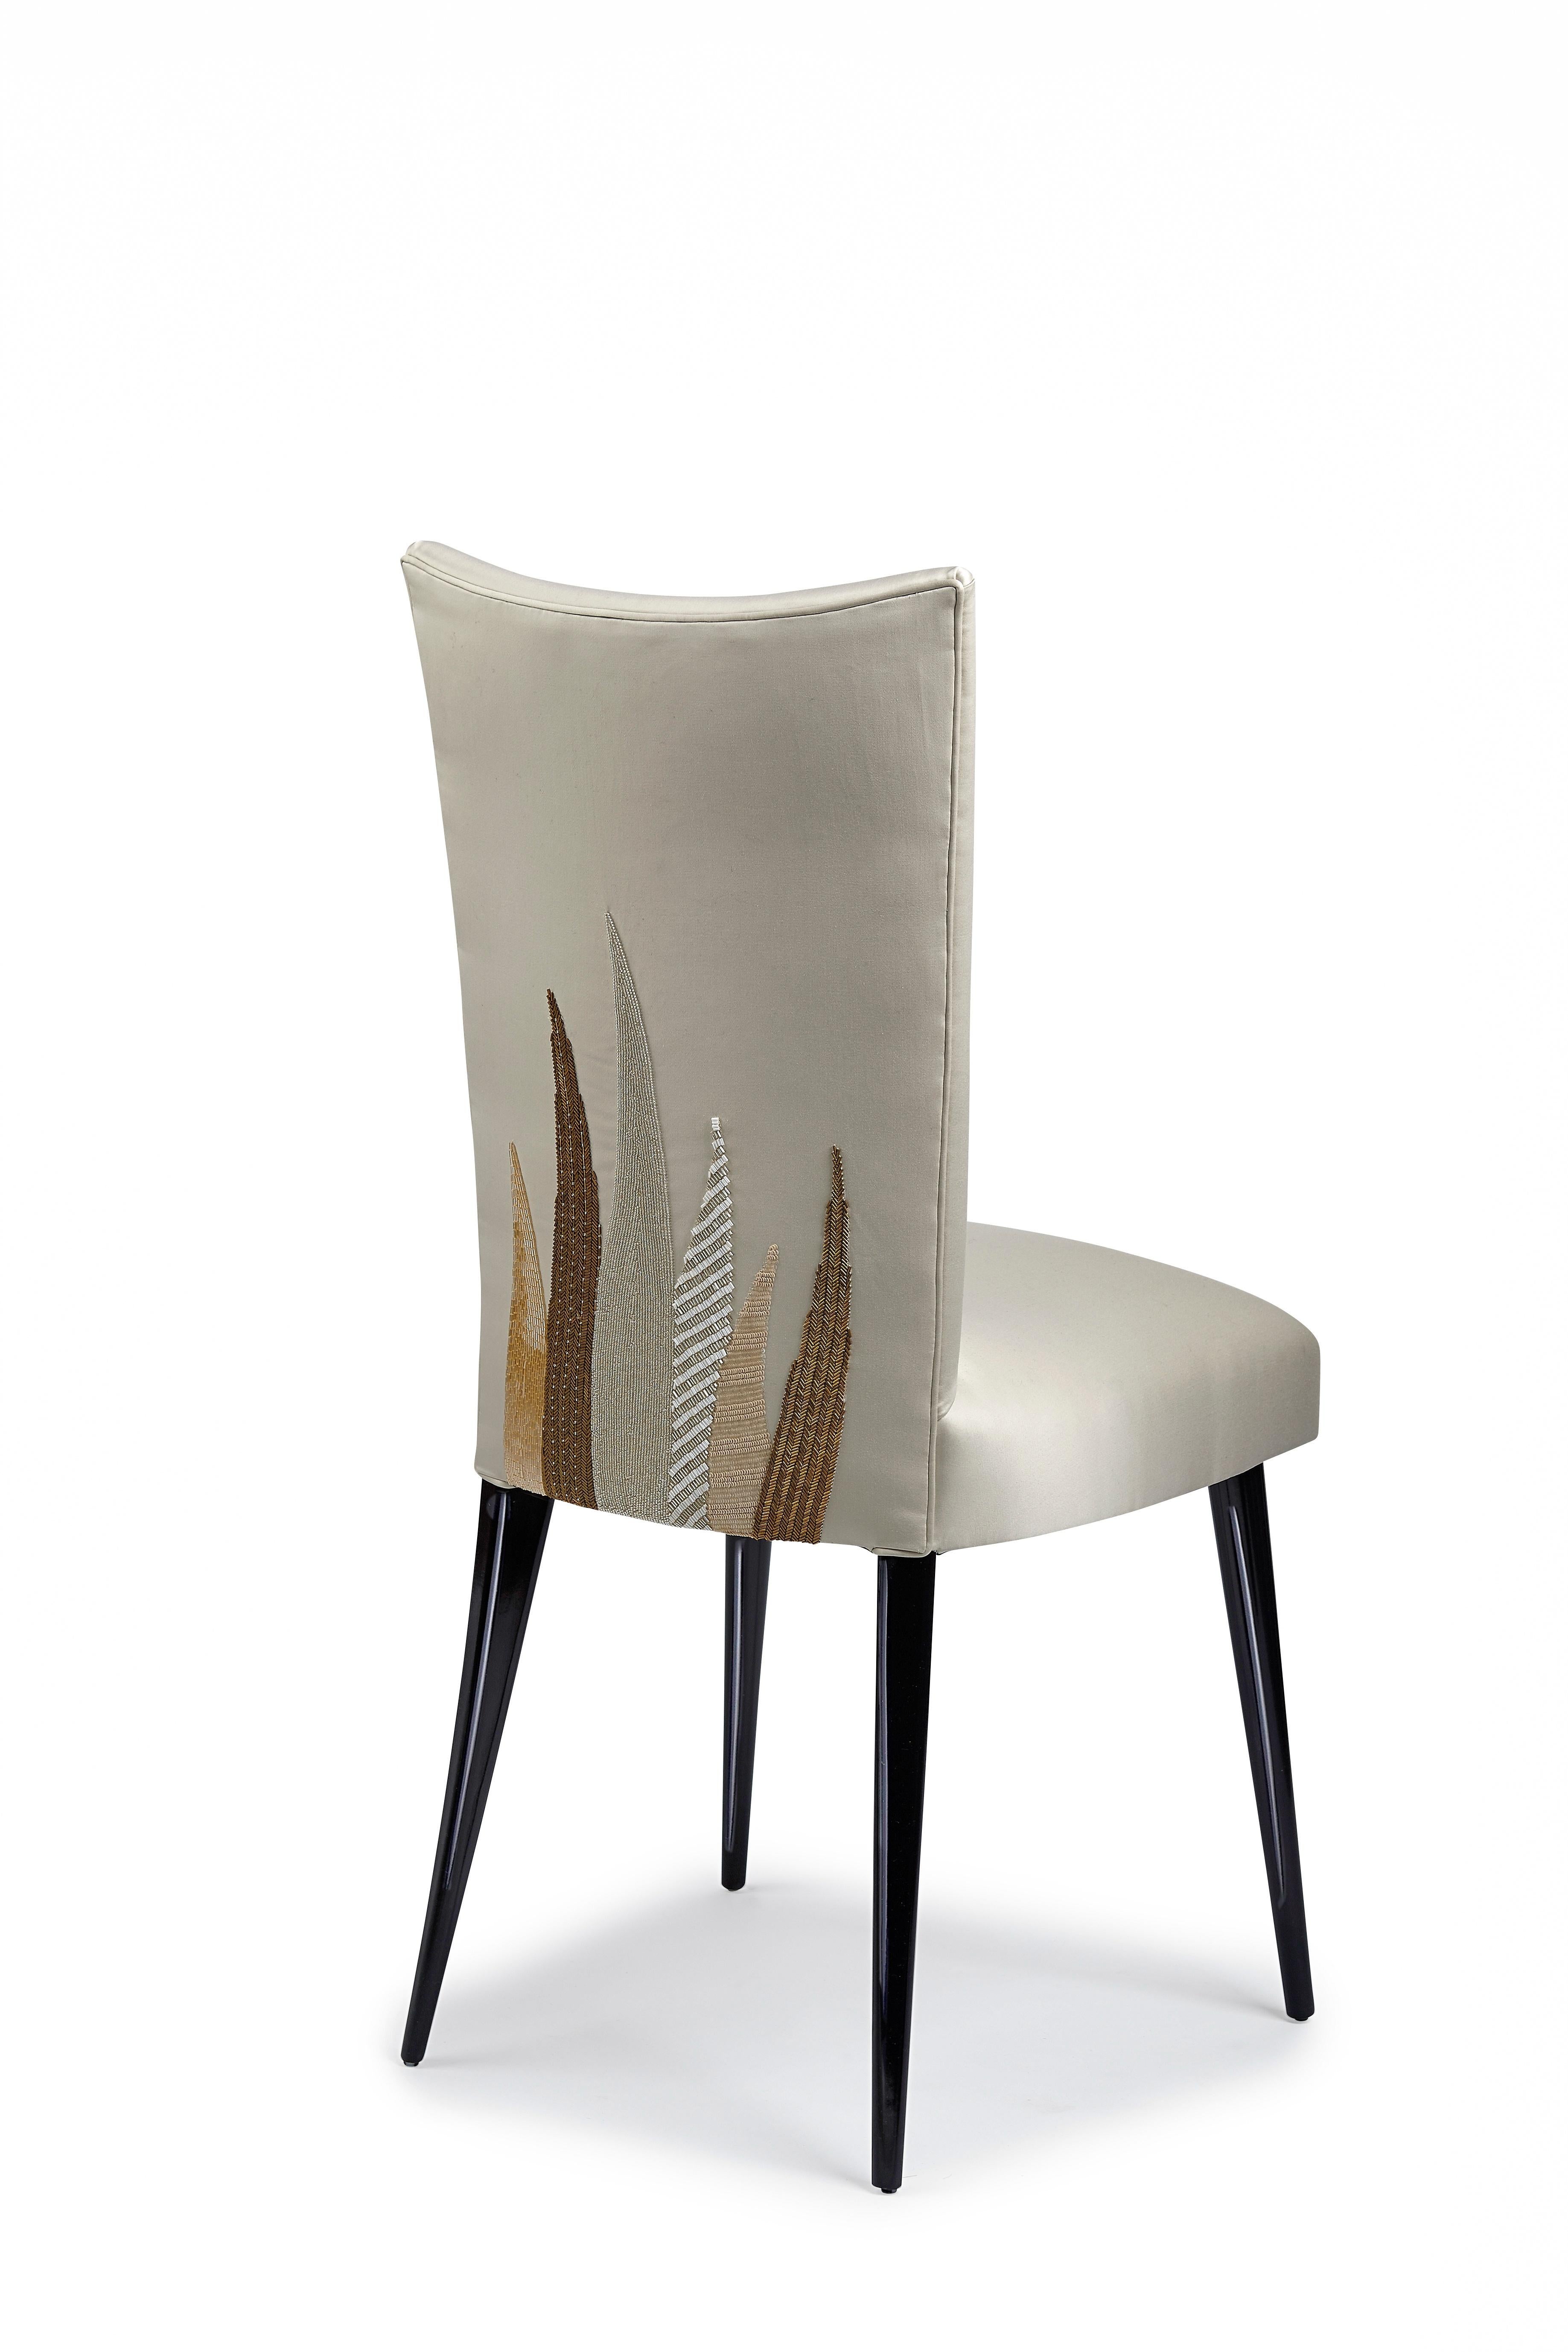 Contemporary Aiveen Daly Agave Stiletto Chair  For Sale